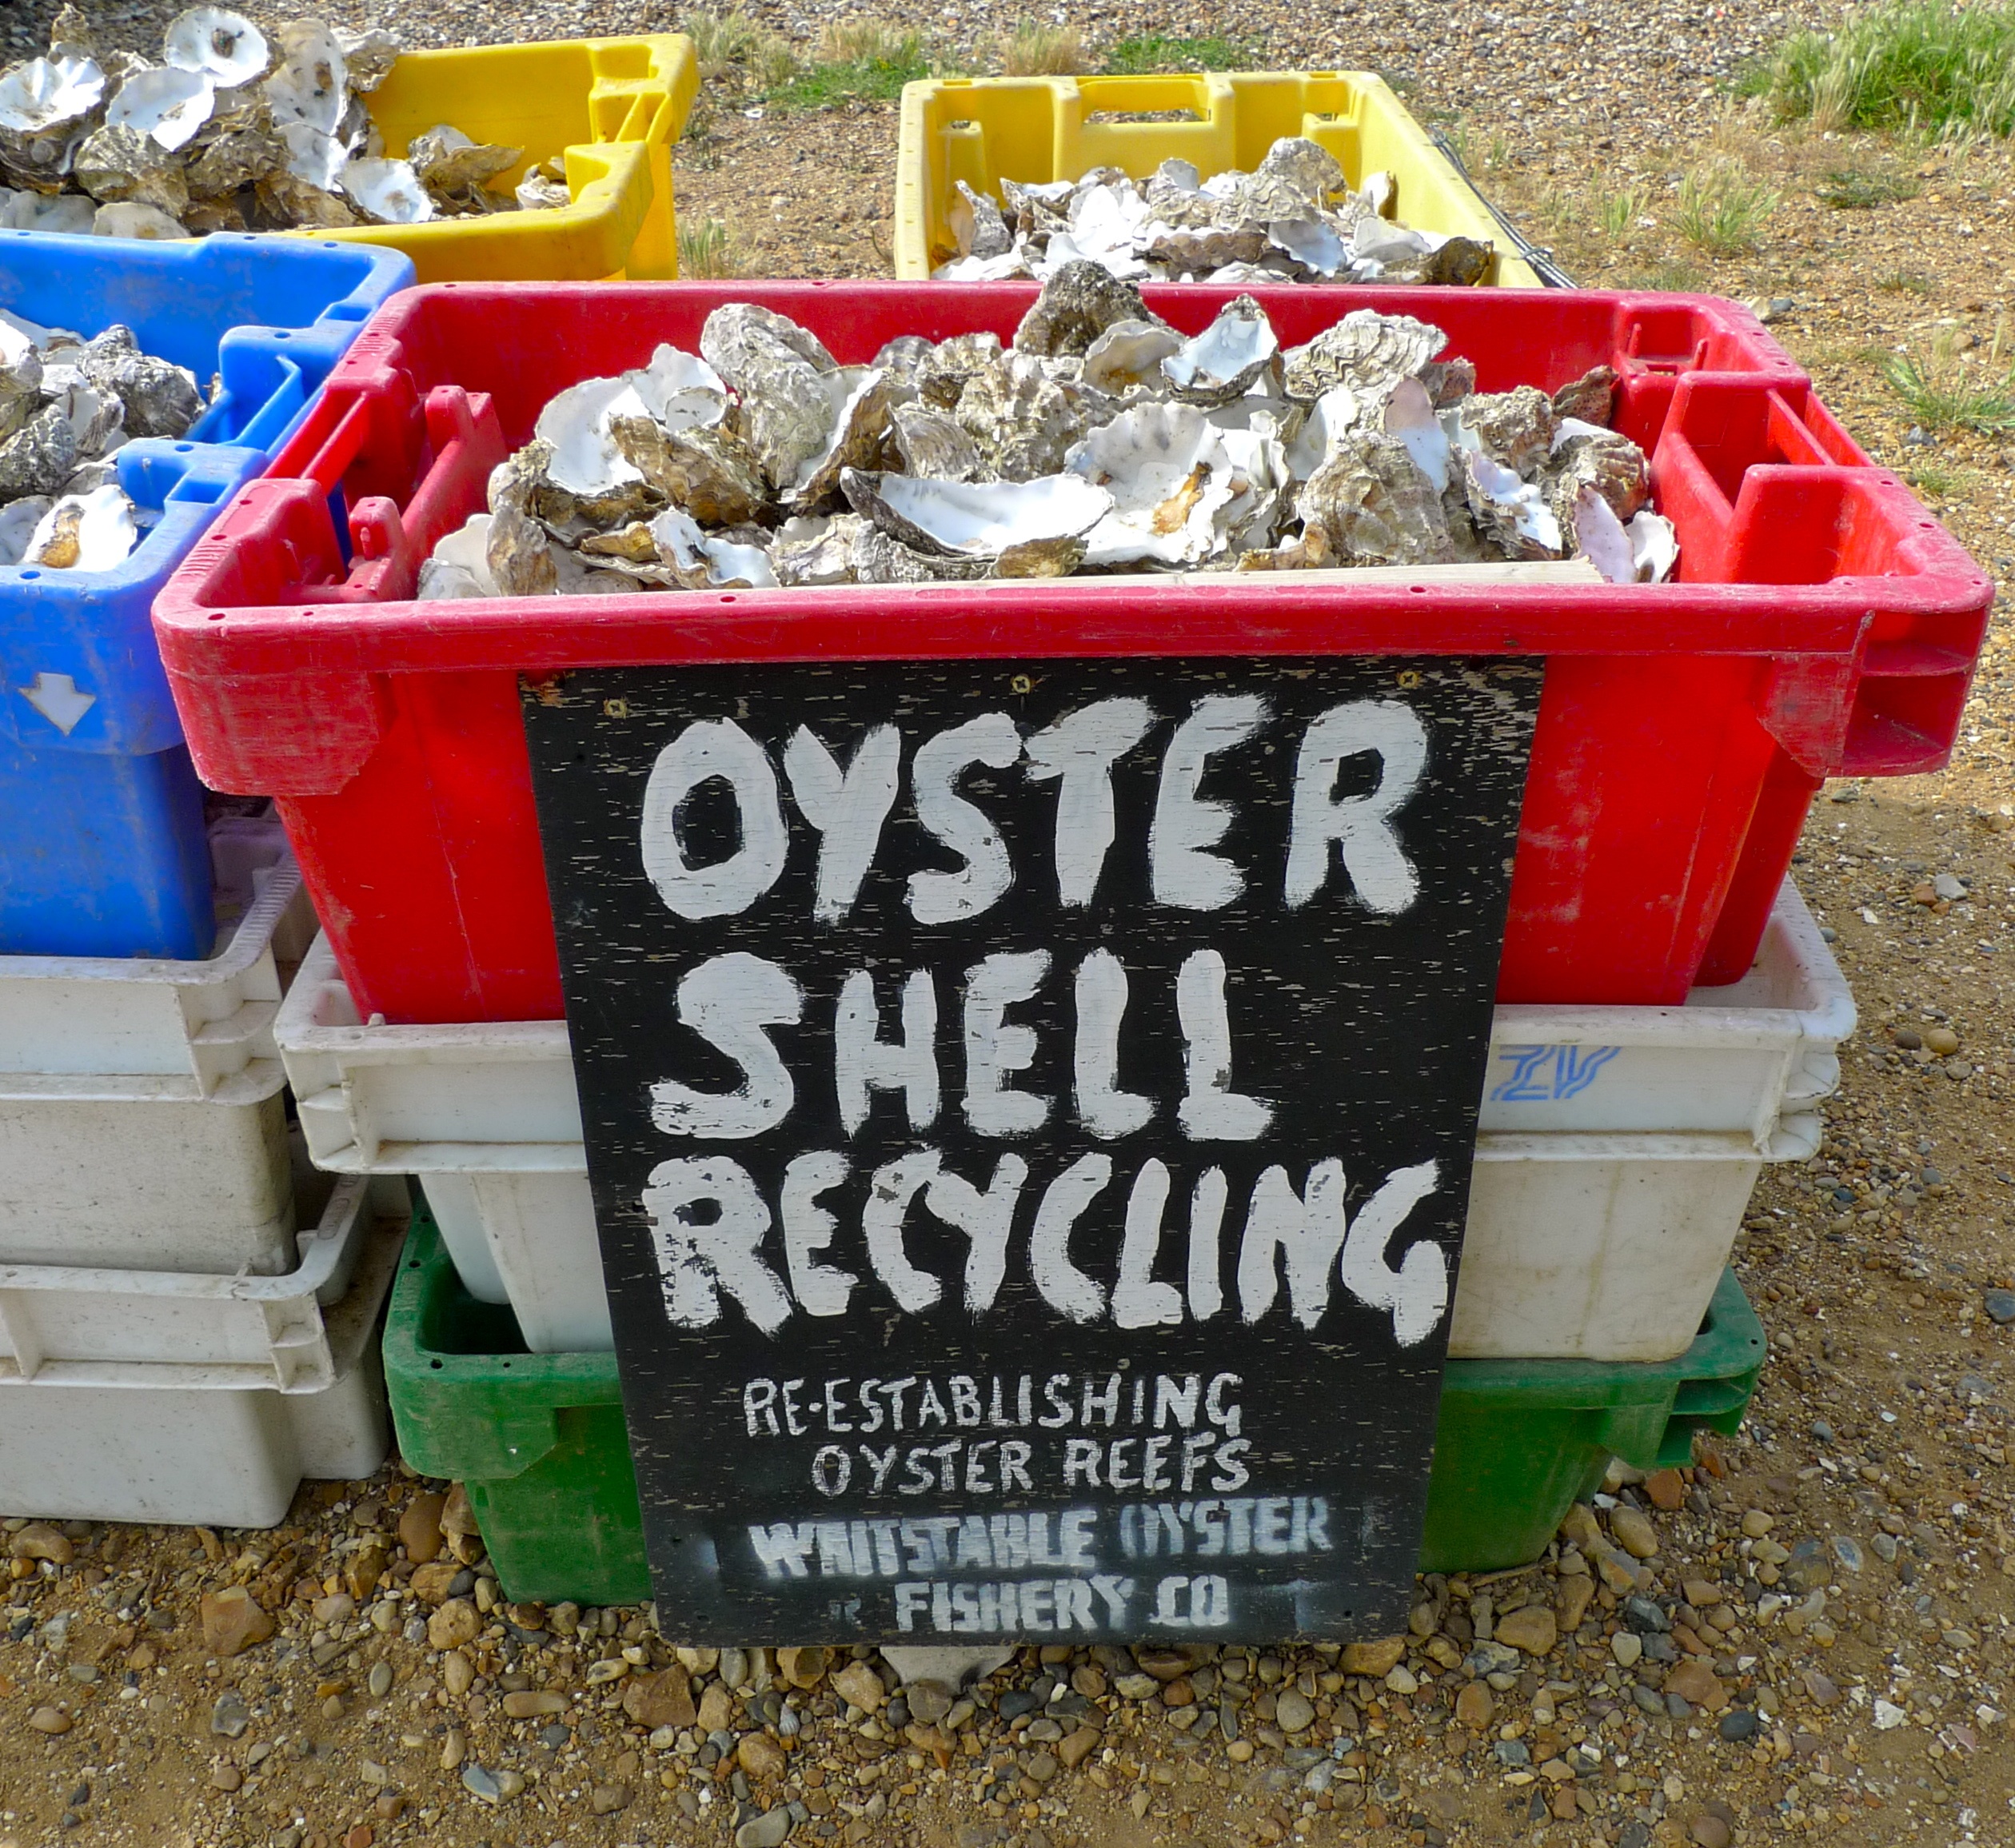 Ambitious partnership sets goal to plant 10 billion water-cleaning oysters in Chesapeake Bay